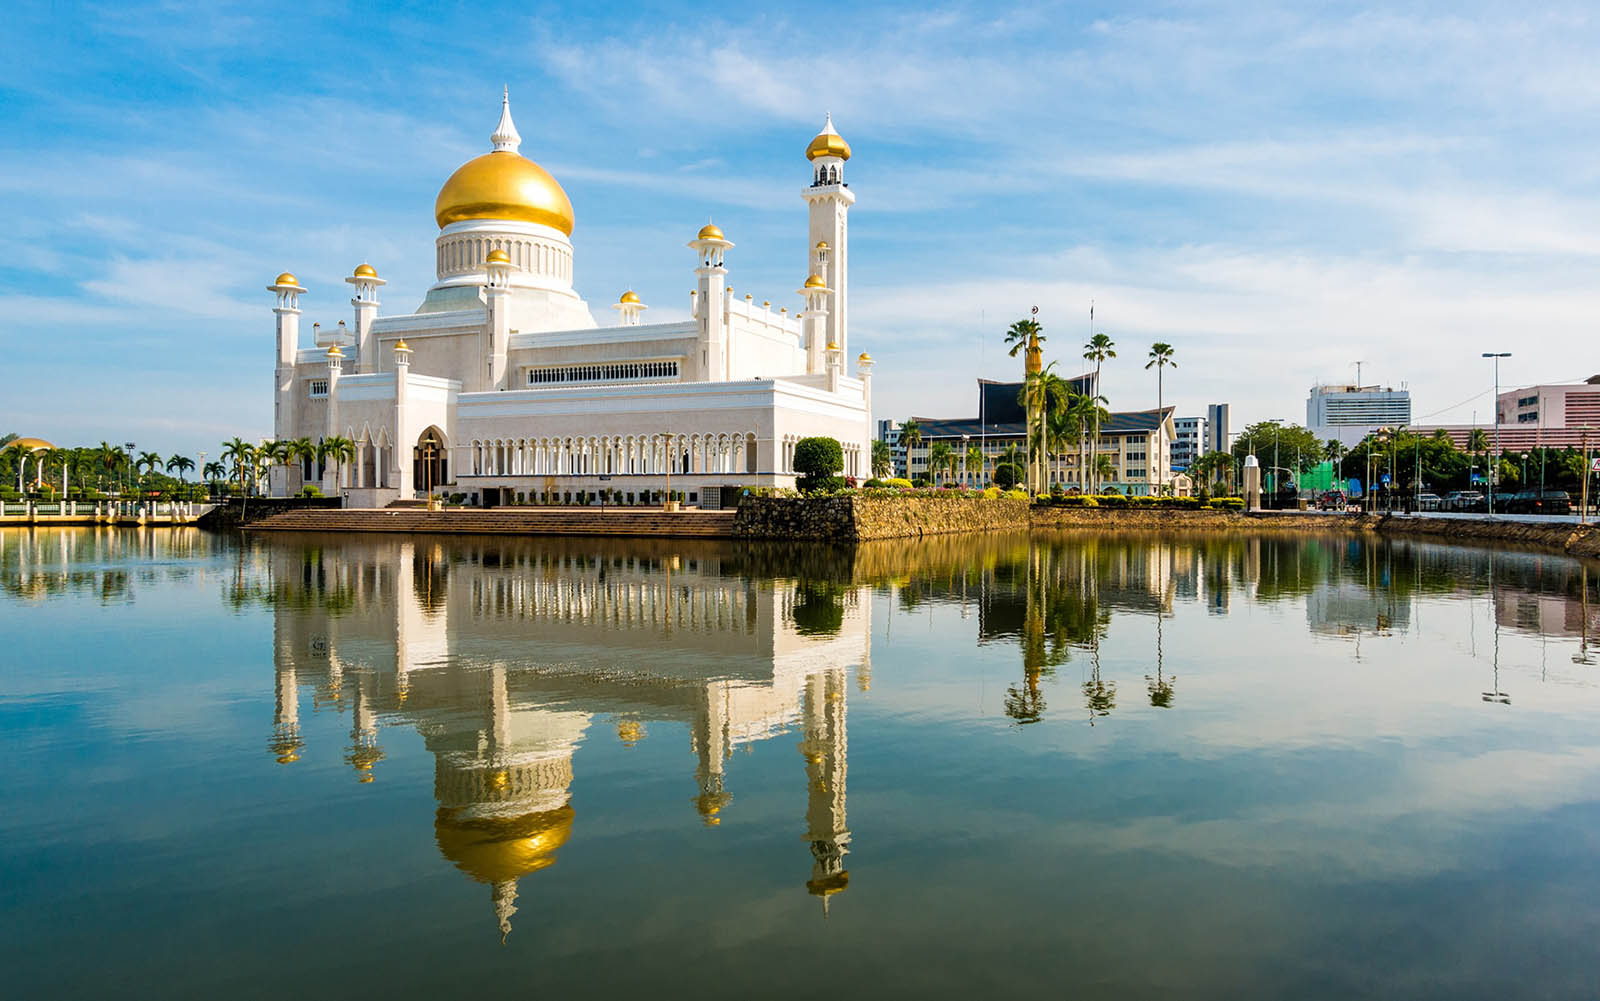 There Are 48 Countries in Asia, It’d Shock Me If You Know Even Half the Capitals Bandar Seri Begawan, Brunei